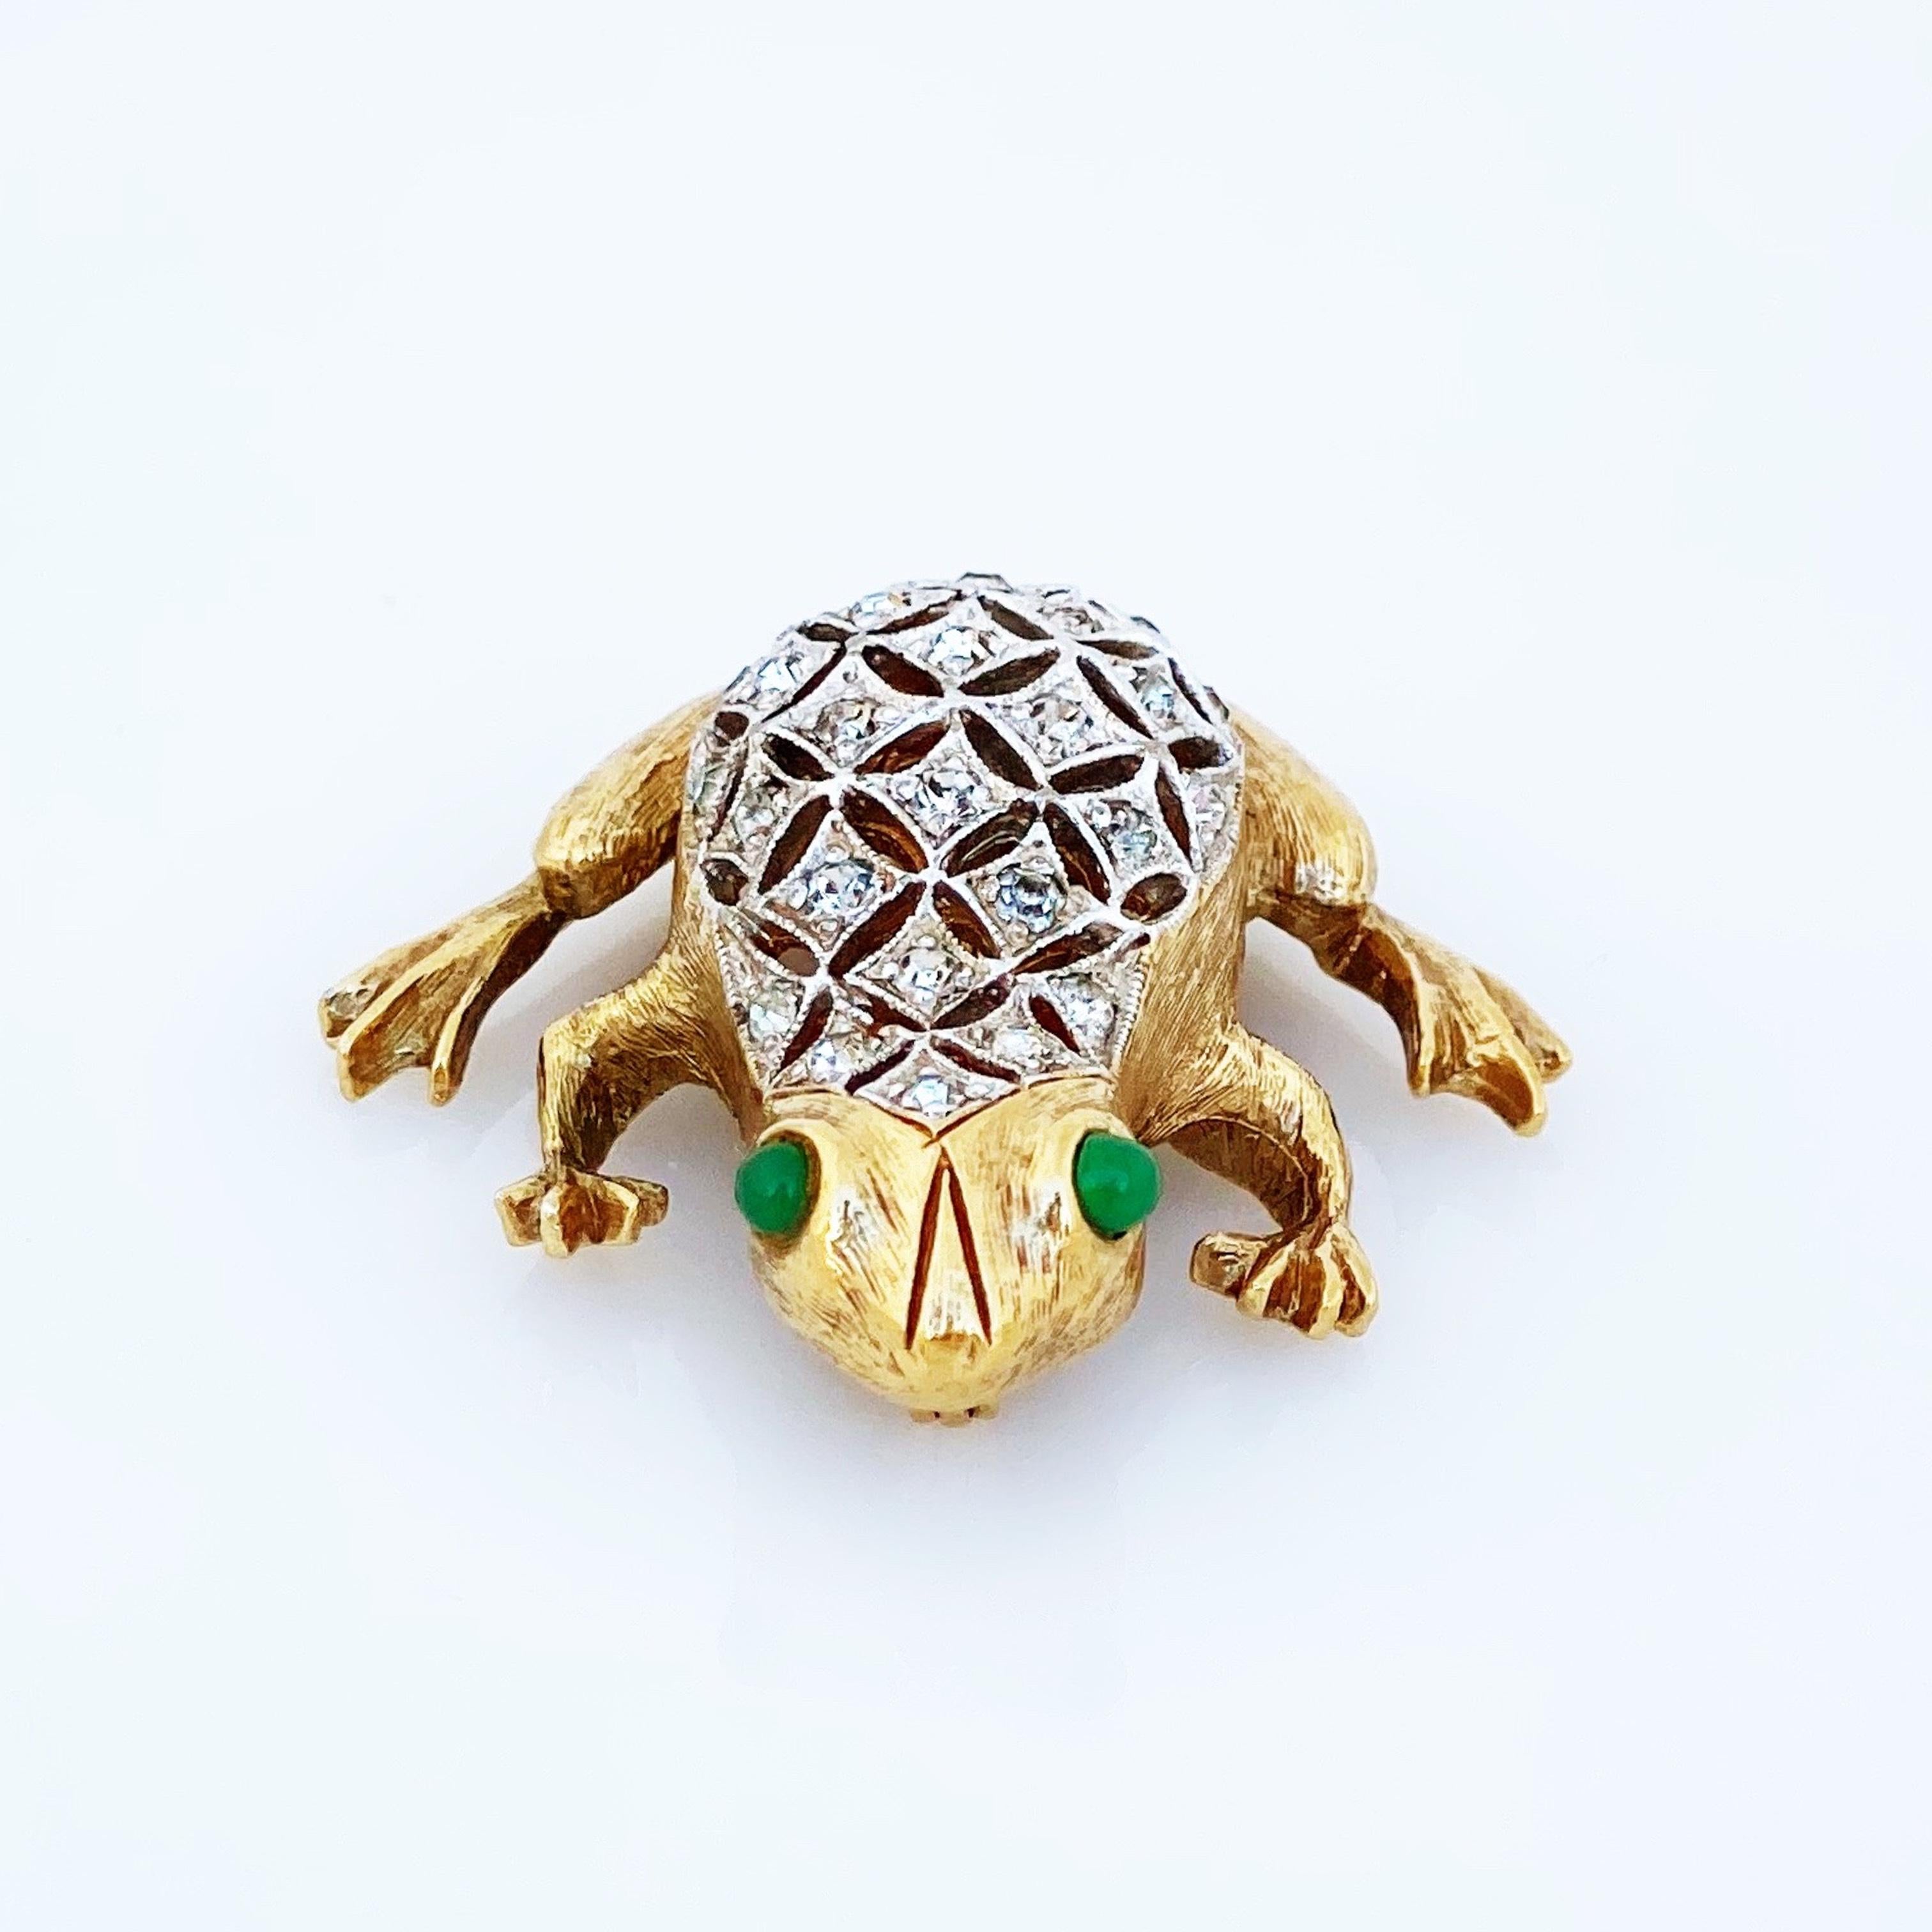 Modern Mixed Metal Figural Frog Brooch With Crystals By Panetta, 1970s